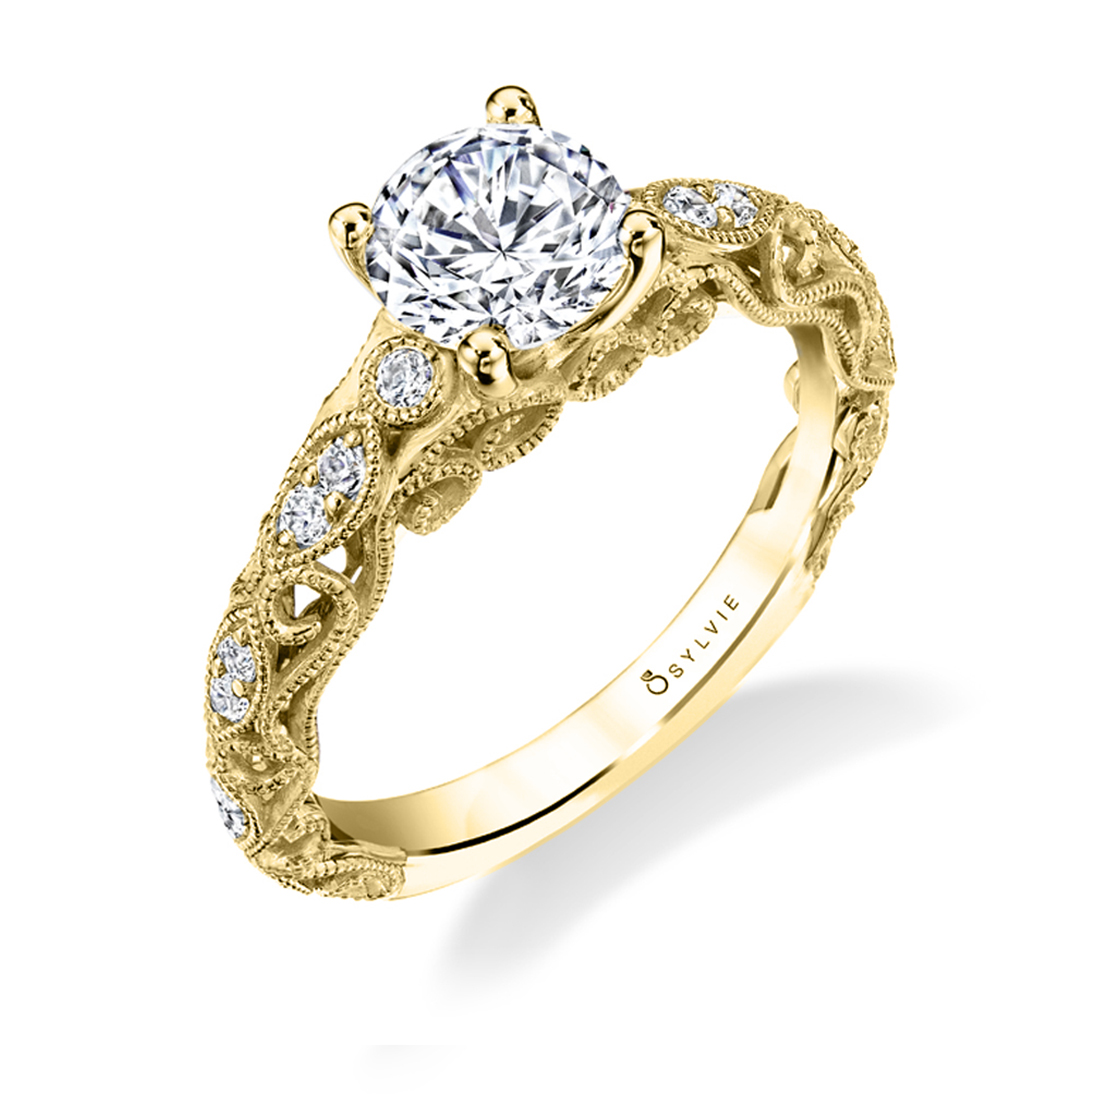 Vintage Engagement Ring with Intricate Scroll Work in Yellow Gold - Viola